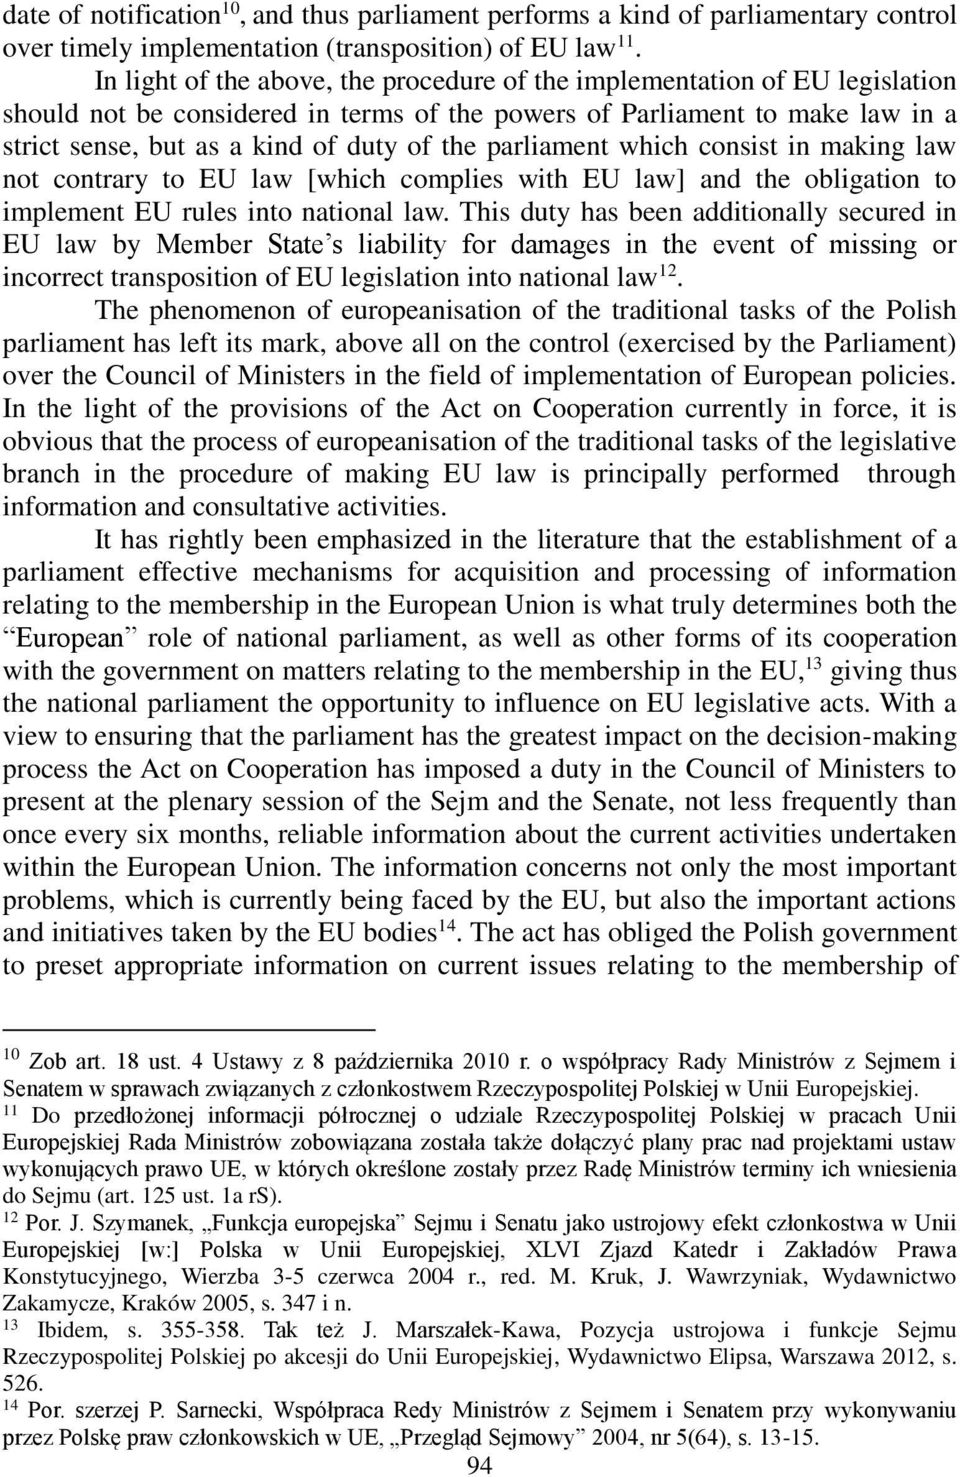 parliament which consist in making law not contrary to EU law [which complies with EU law] and the obligation to implement EU rules into national law.